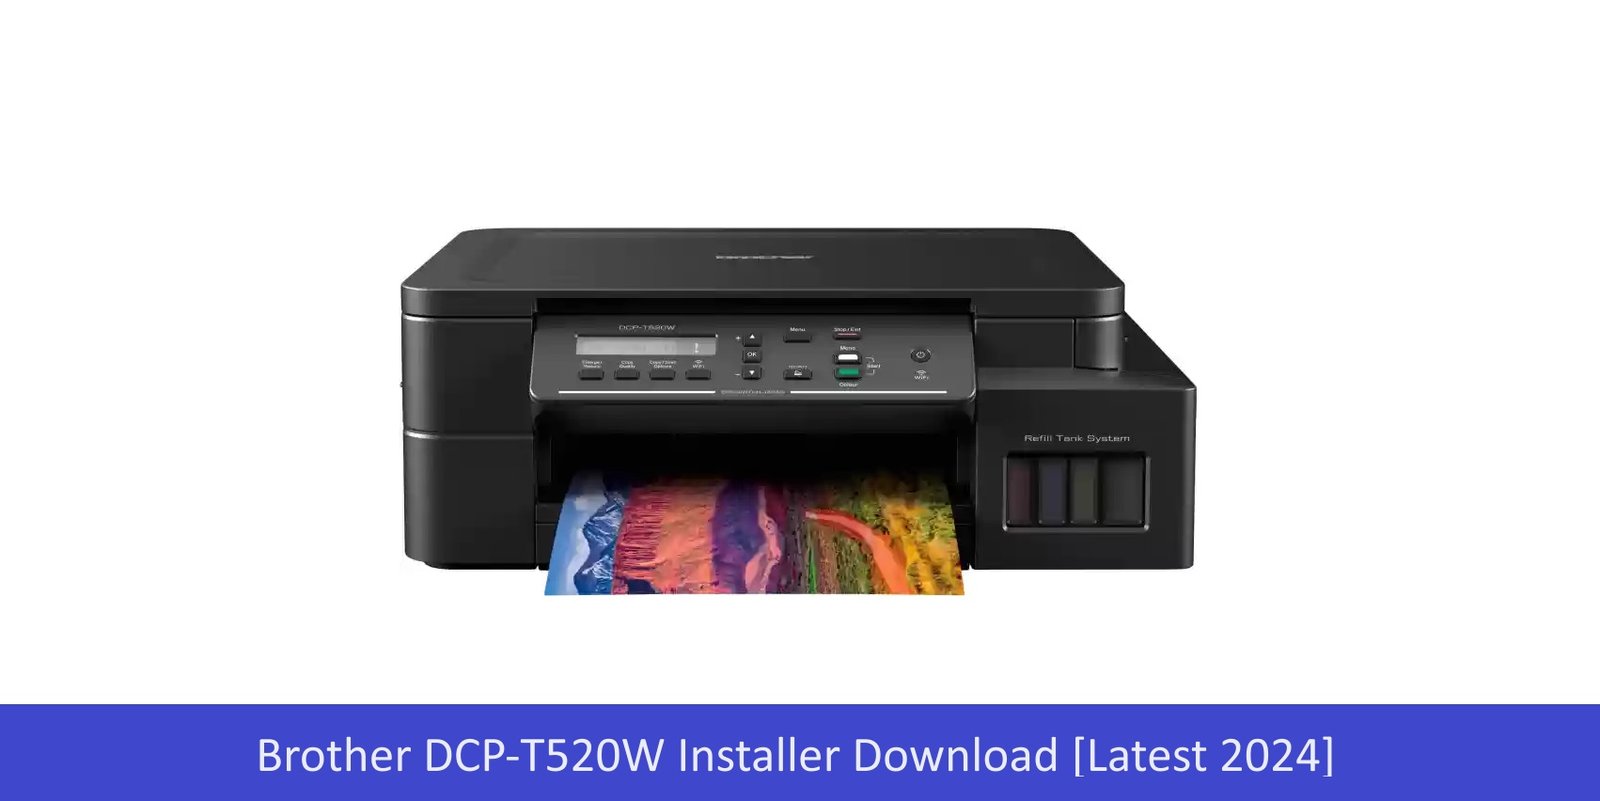 Brother DCP-T520W Installer Download